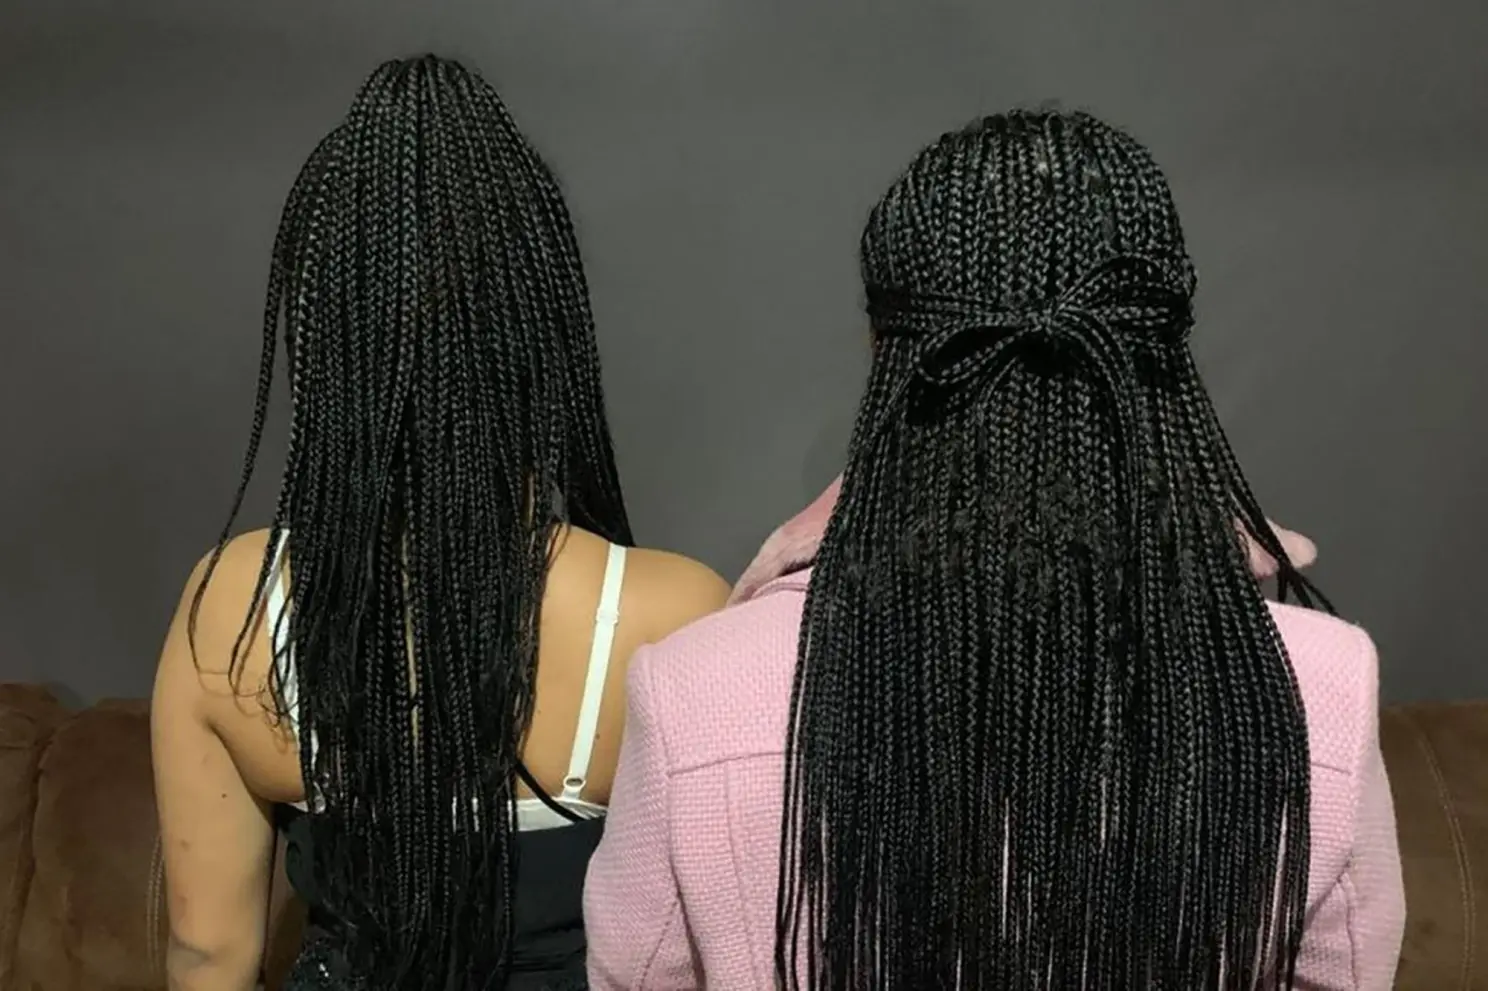 Two Australian Sisters Were Kicked Out Of Their High School For Not Tying Back Their Braids